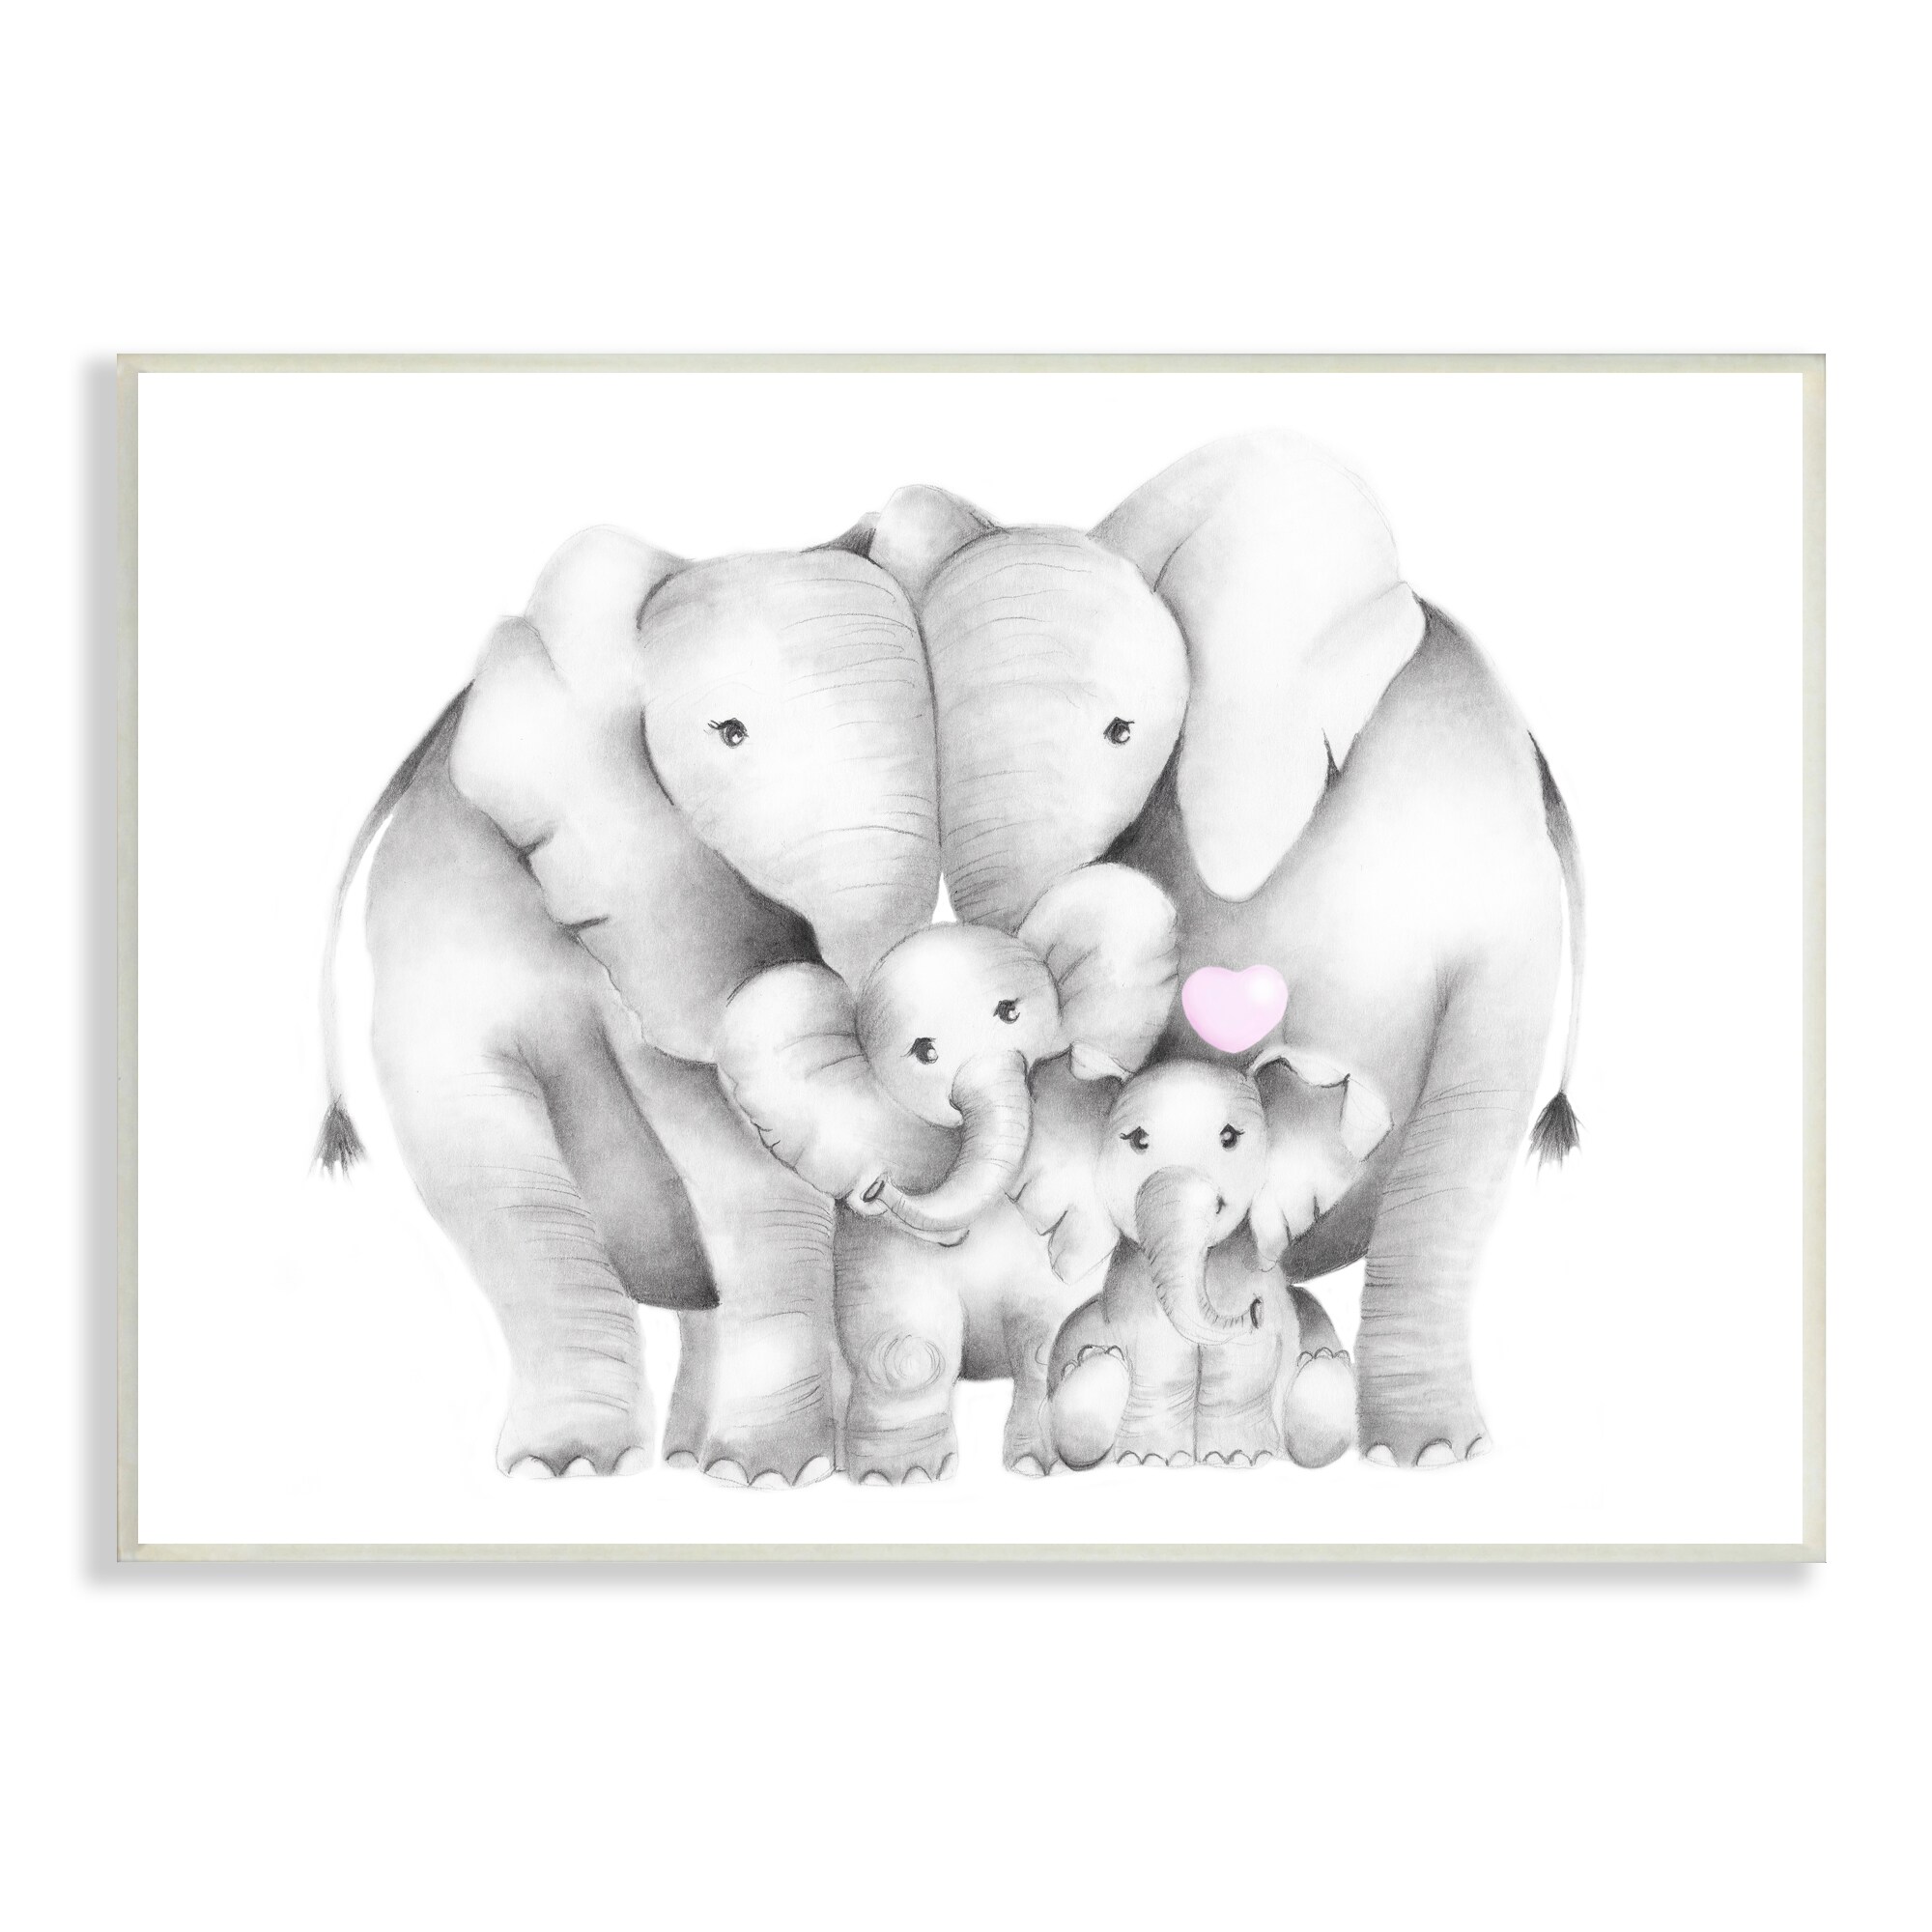 10 x 0.5 x 15 Stupell Home Décor Baby Elephant Studio Photo Wall Plaque Art Proudly Made in USA Stupell Industries brp-1819_wd_10x15 